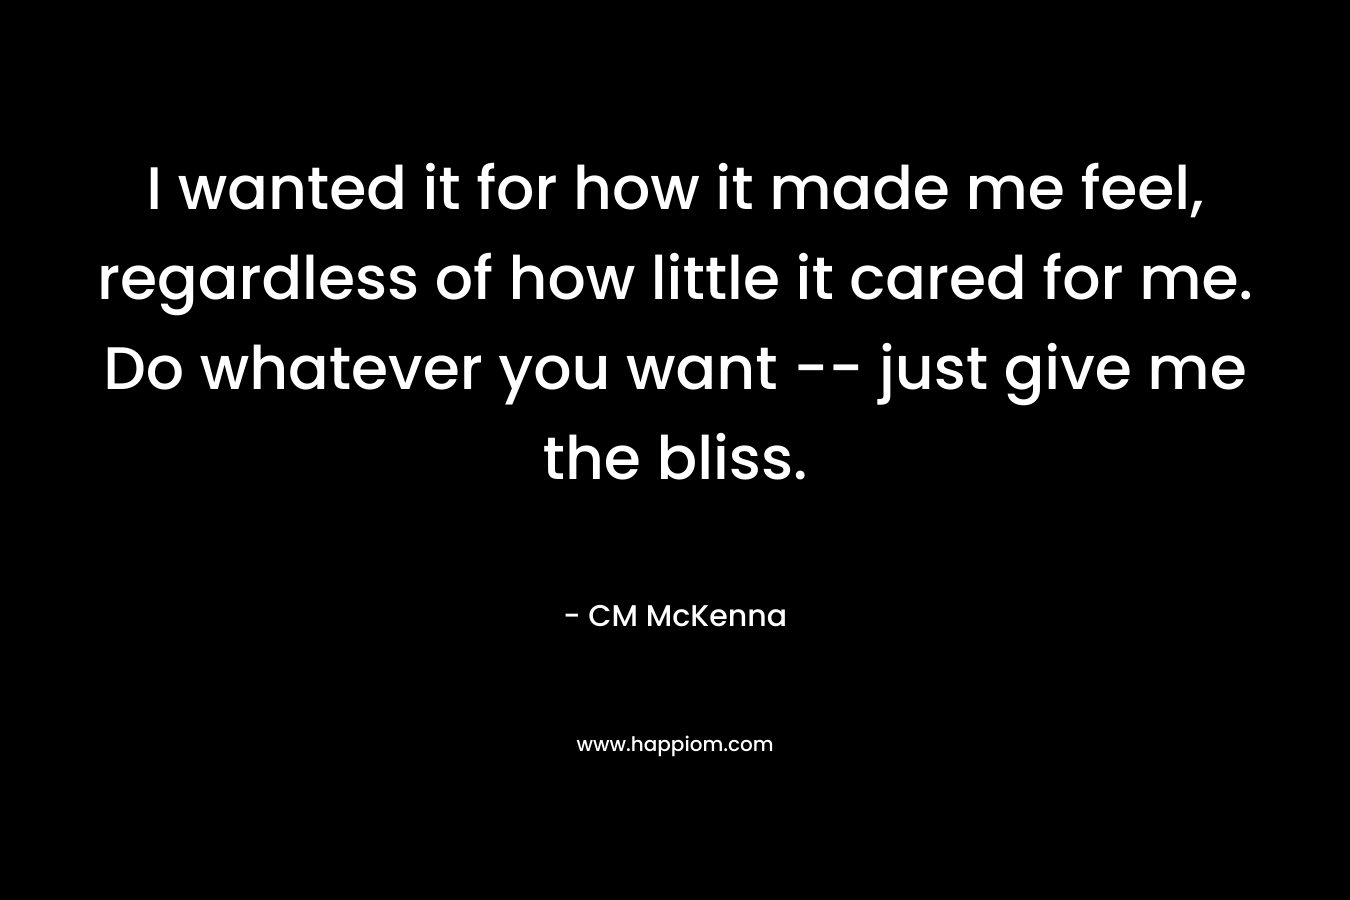 I wanted it for how it made me feel, regardless of how little it cared for me. Do whatever you want — just give me the bliss. – CM McKenna